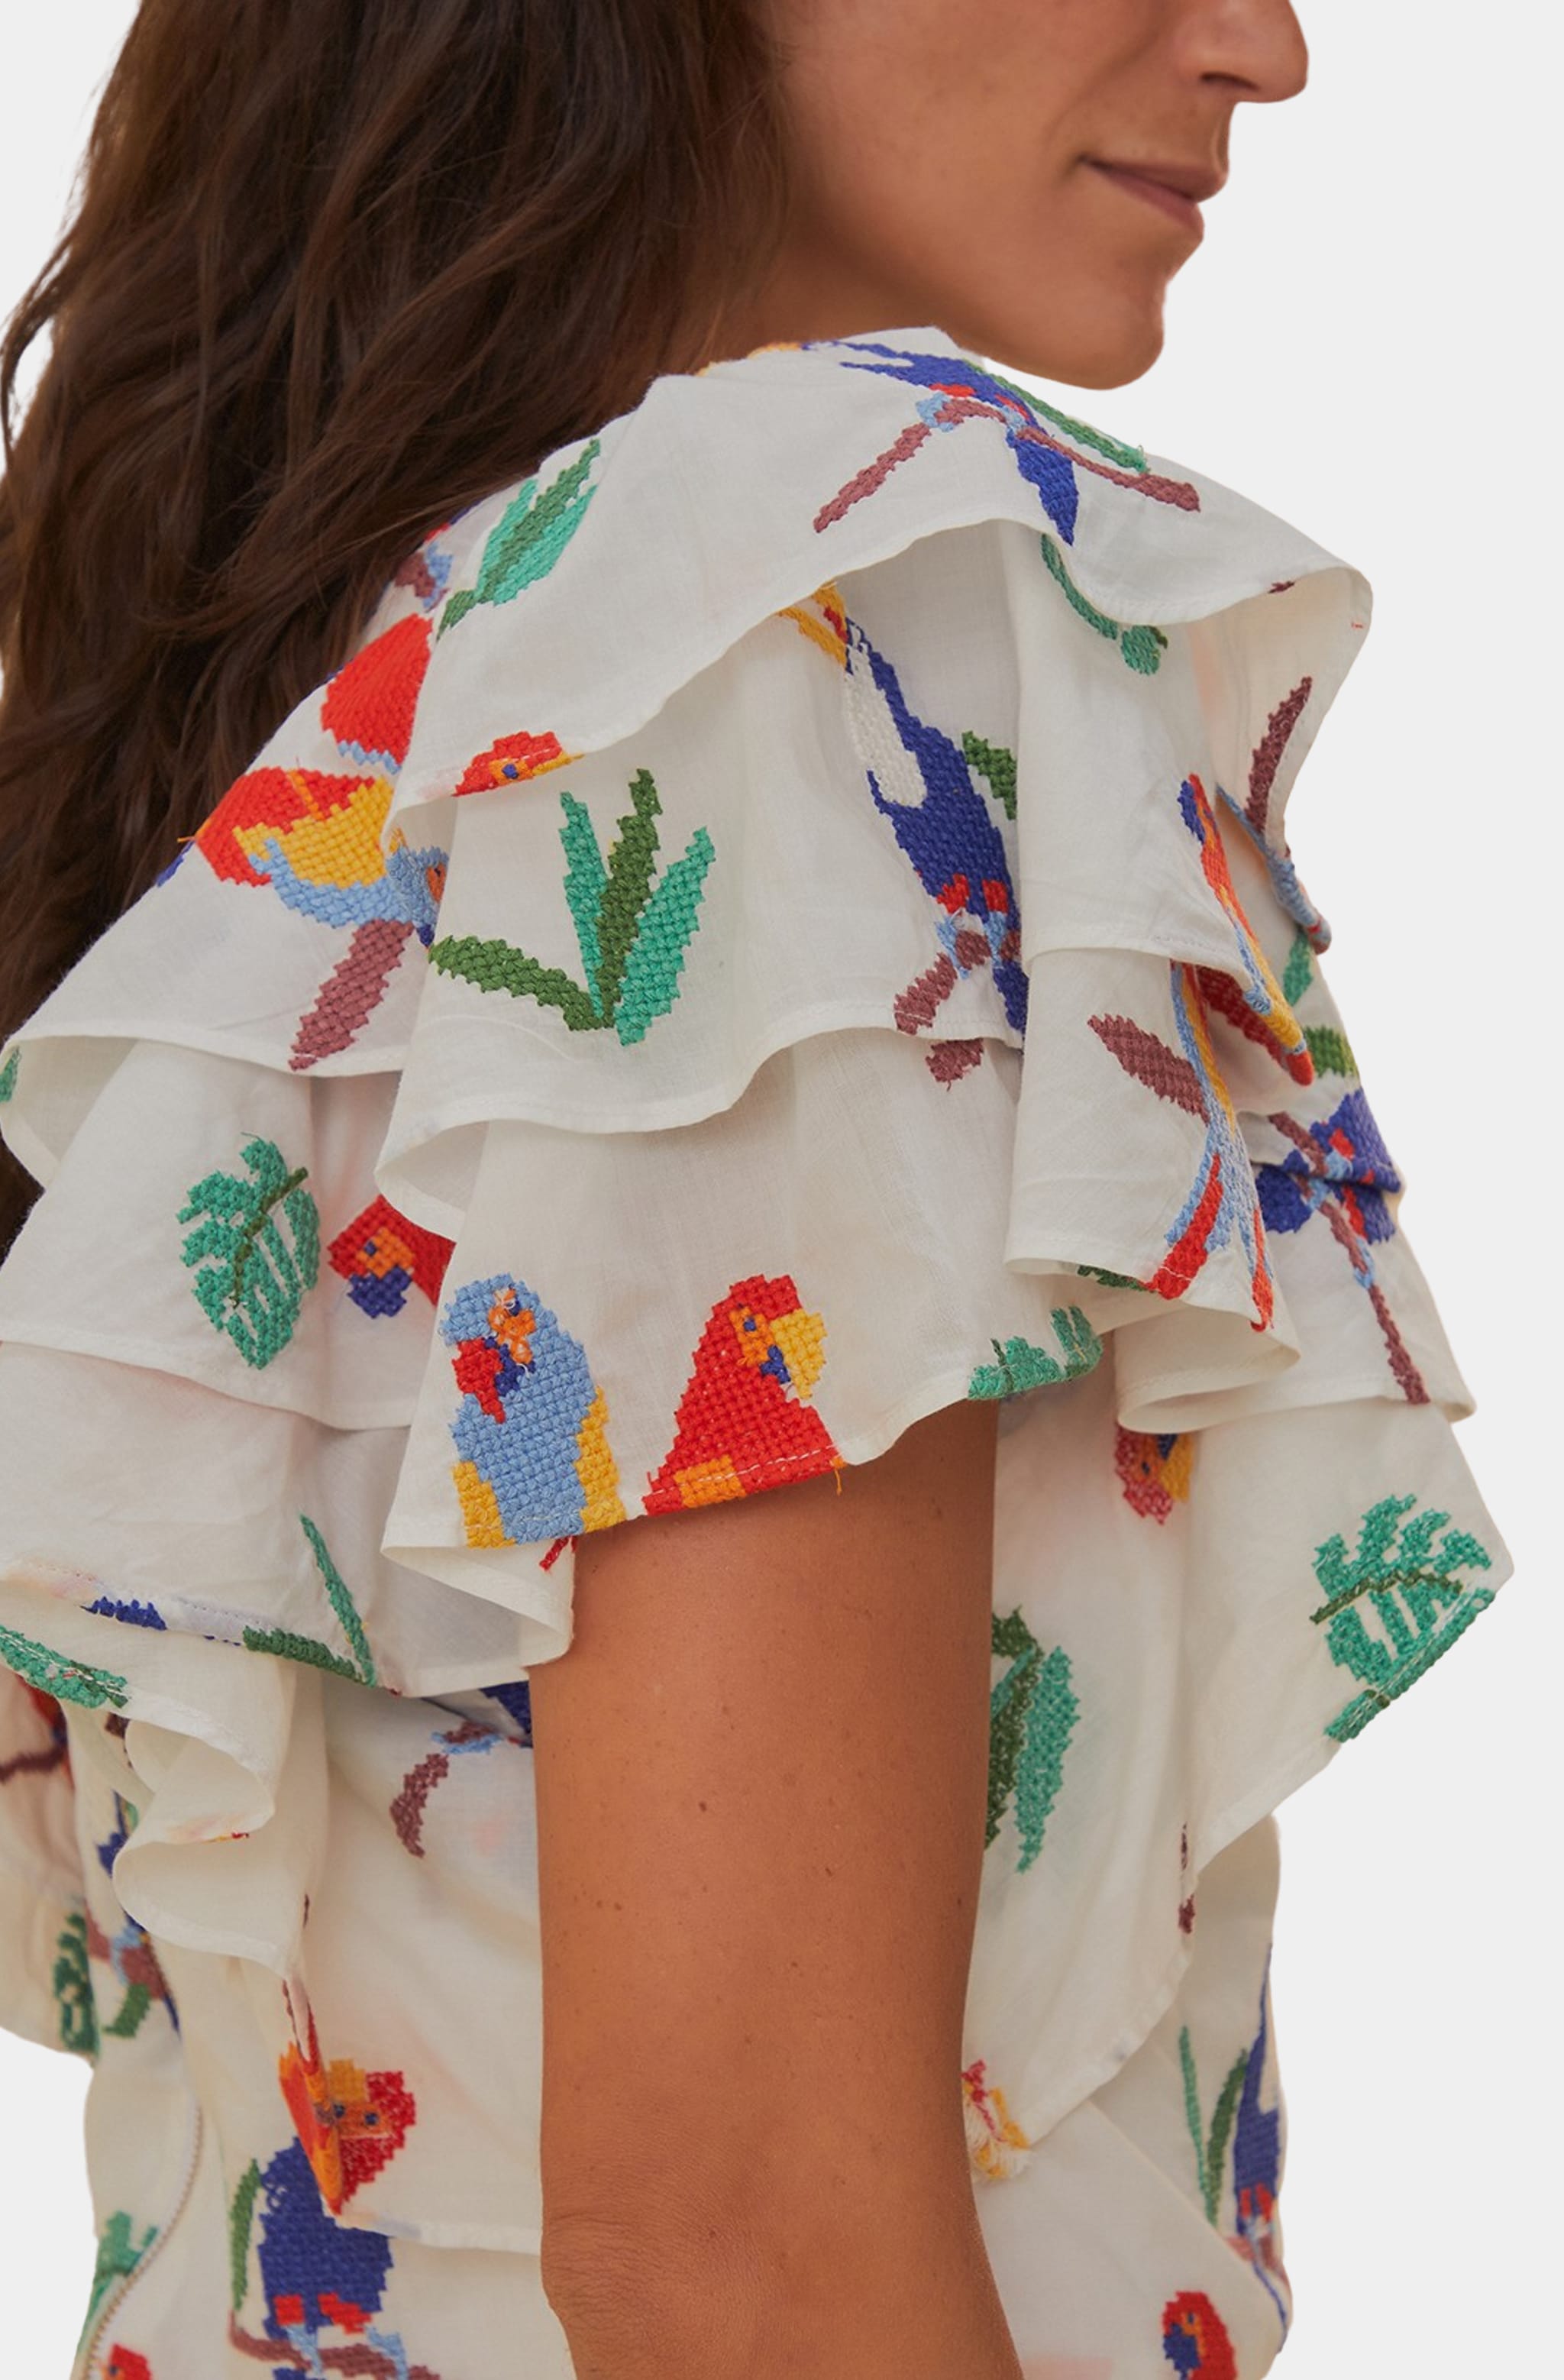 Off-White Stitched Birds Blouse Short Sleeve Top